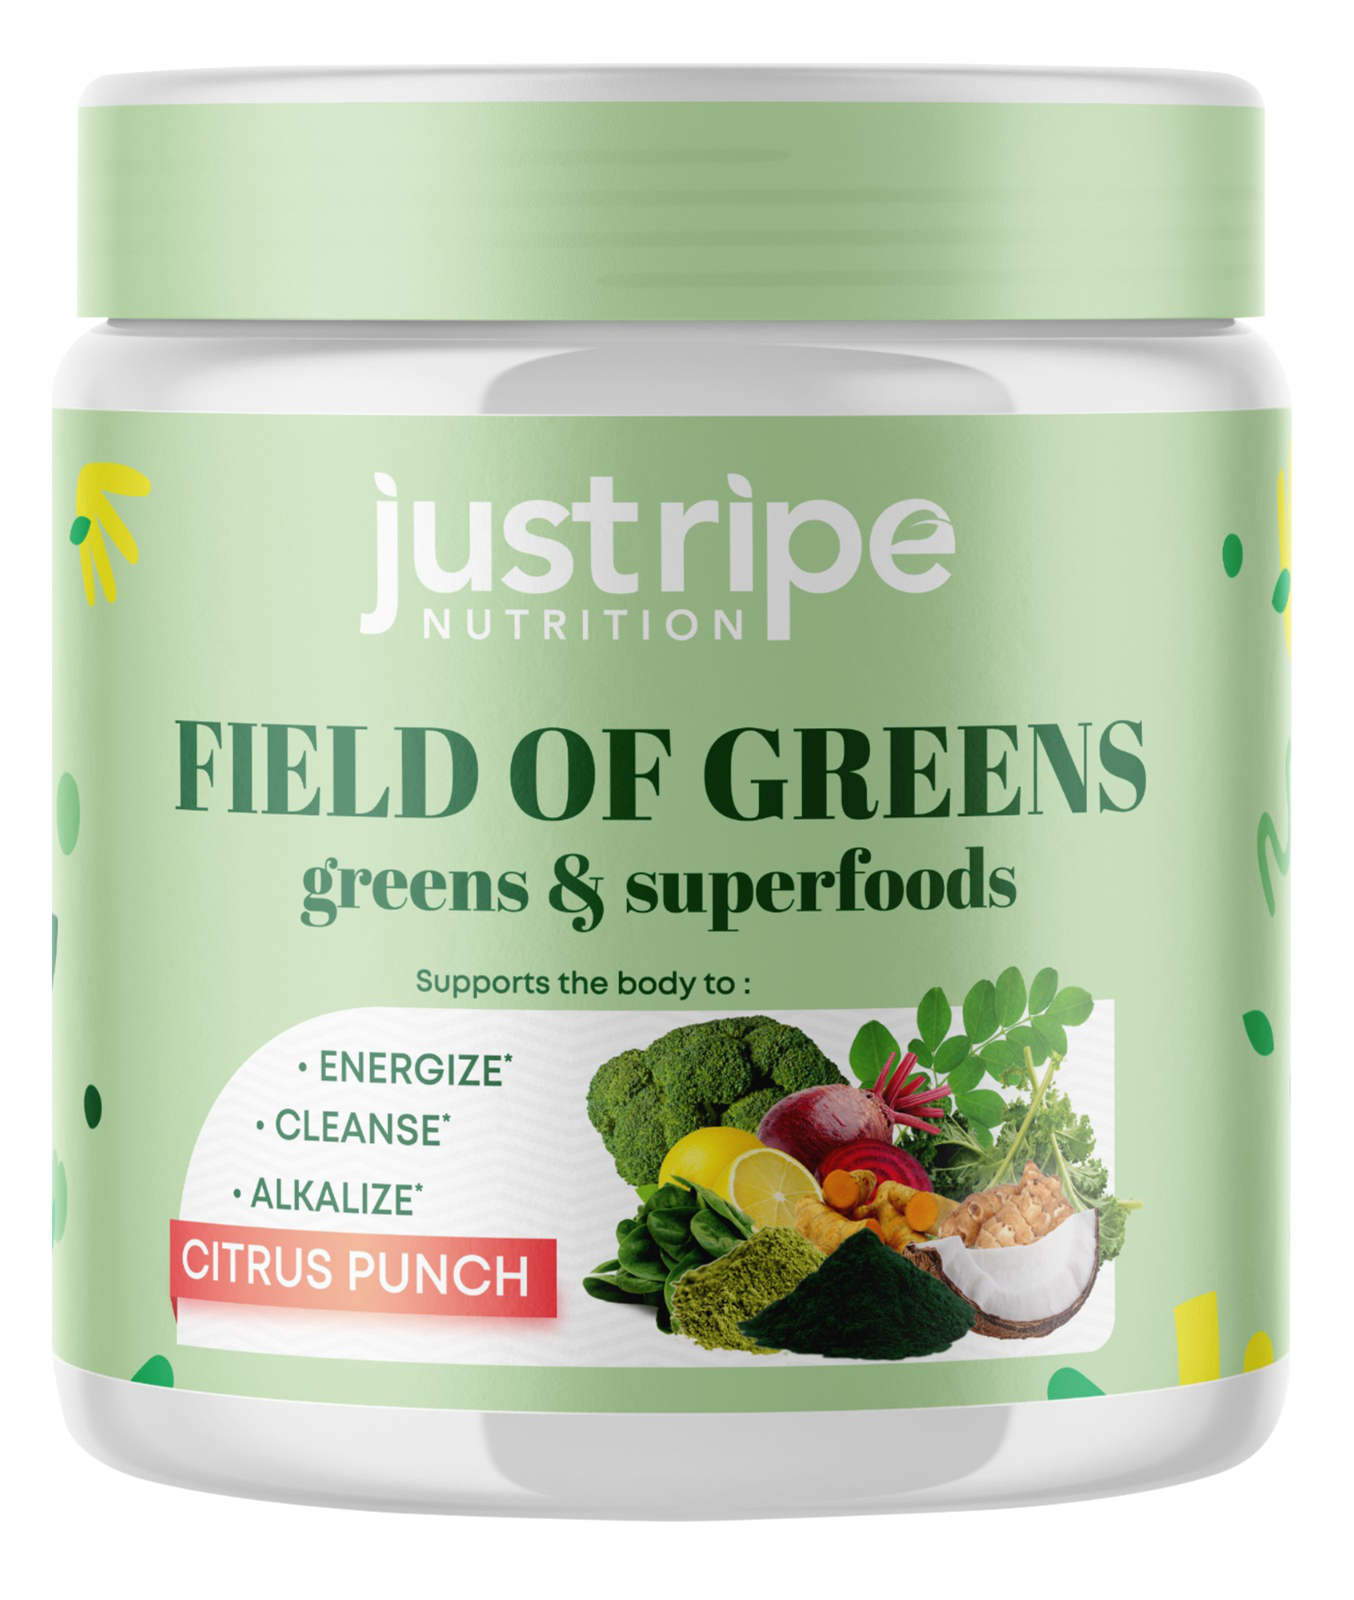 Just Ripe Field of Greens - Super Greens Powder Smoothie Mix for Boost Energy